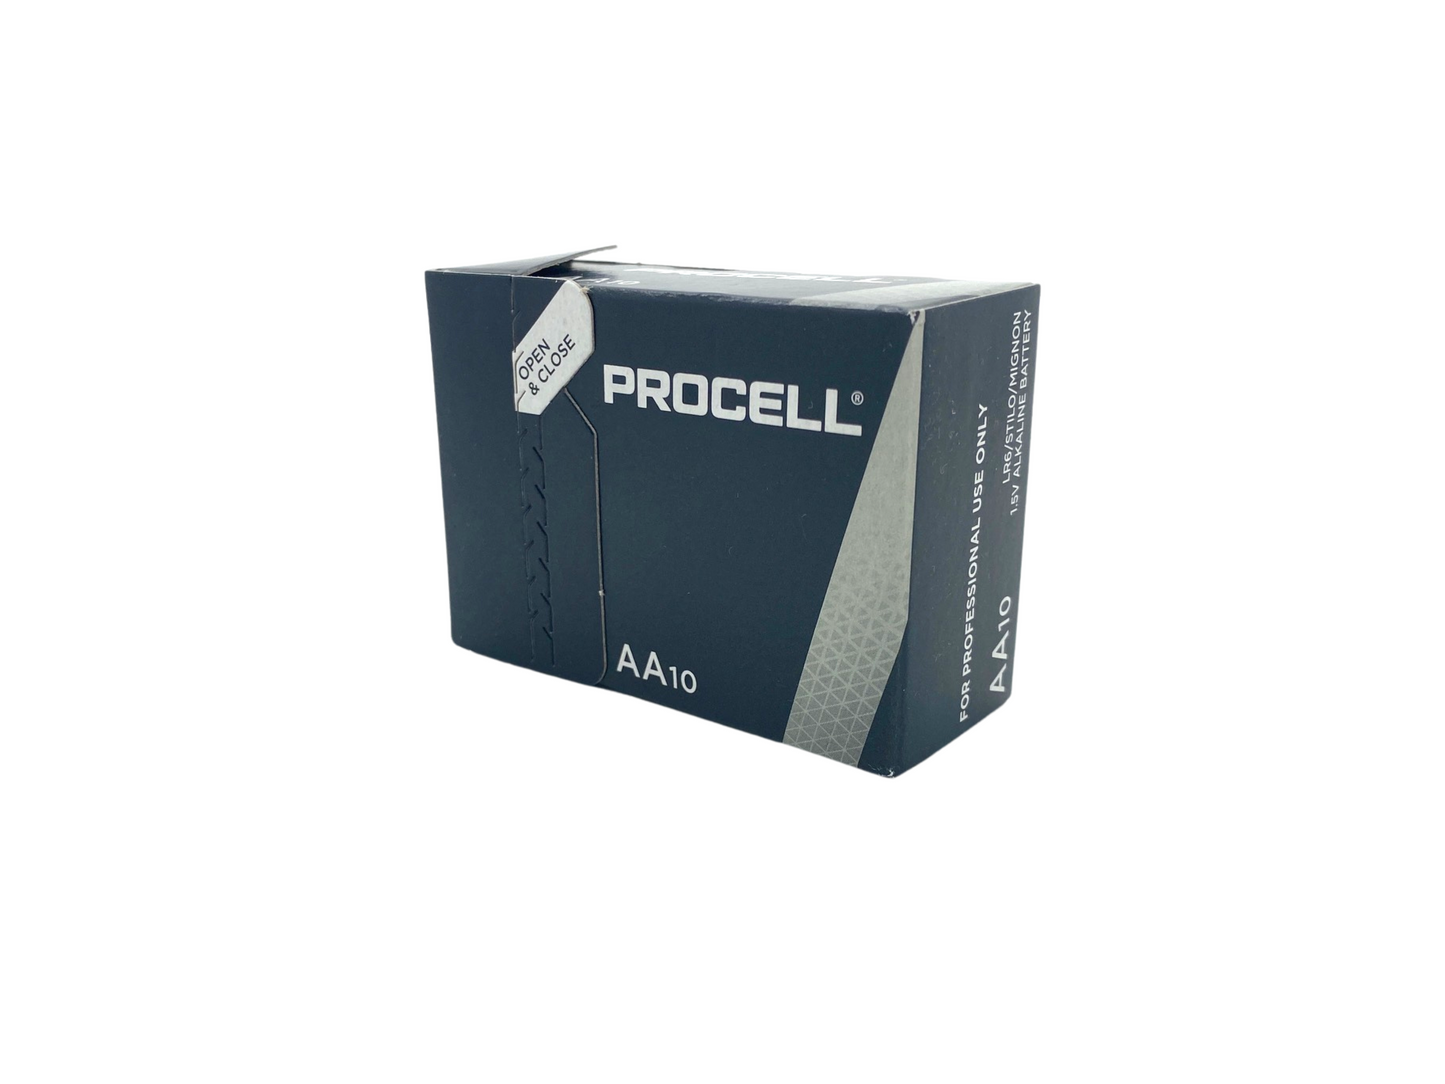 Duracell Procell AA Batteries 10 Pack